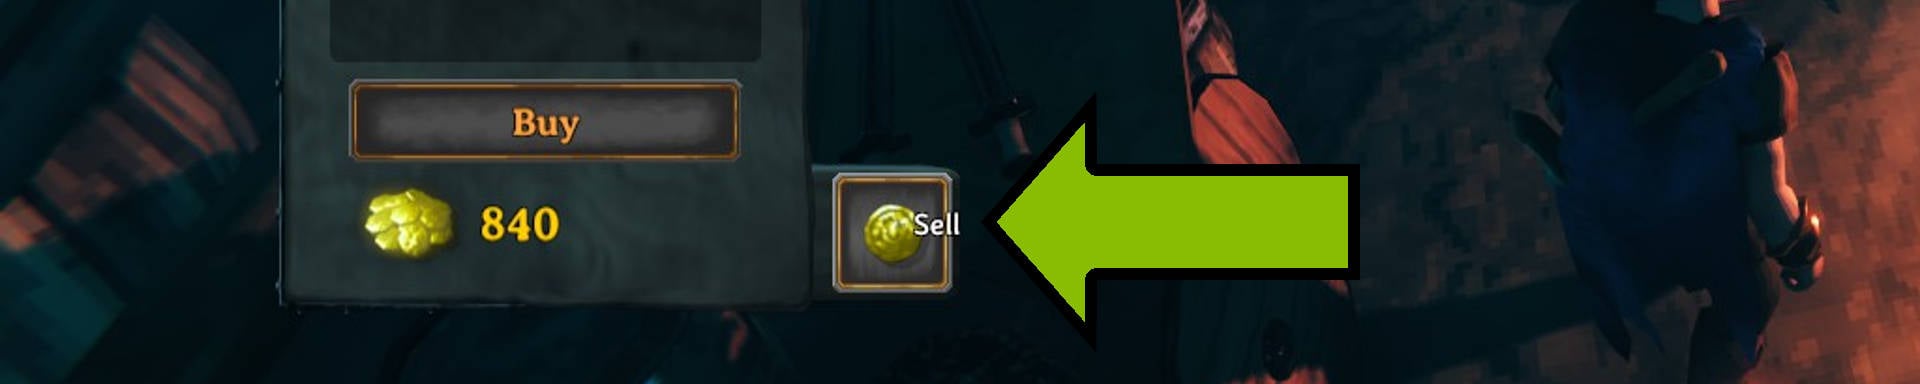 Valheim Merchant and Selling Items Guide How to Sell